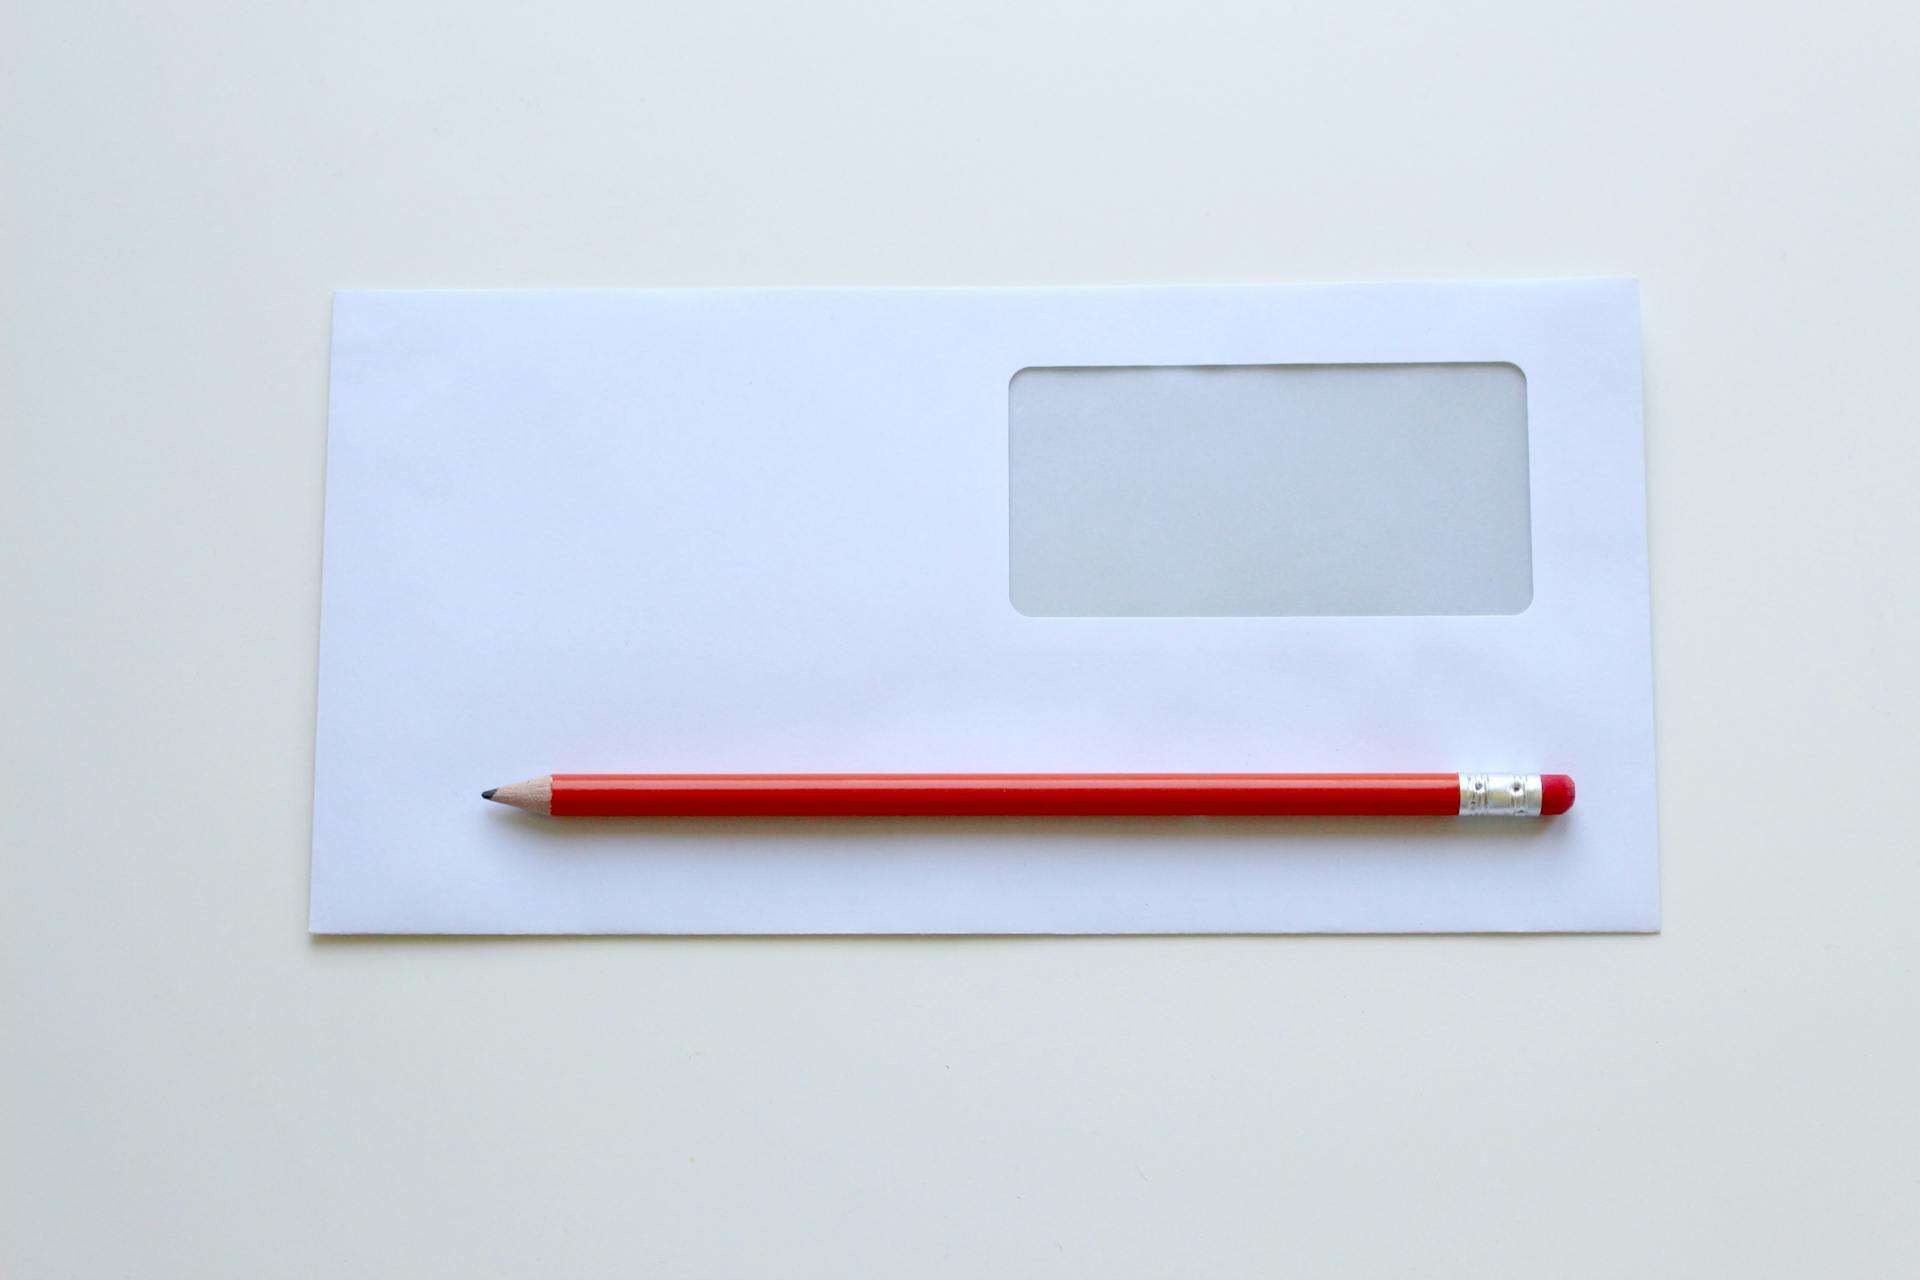 A red pencil on top of a white window envelope | Source: Pexels